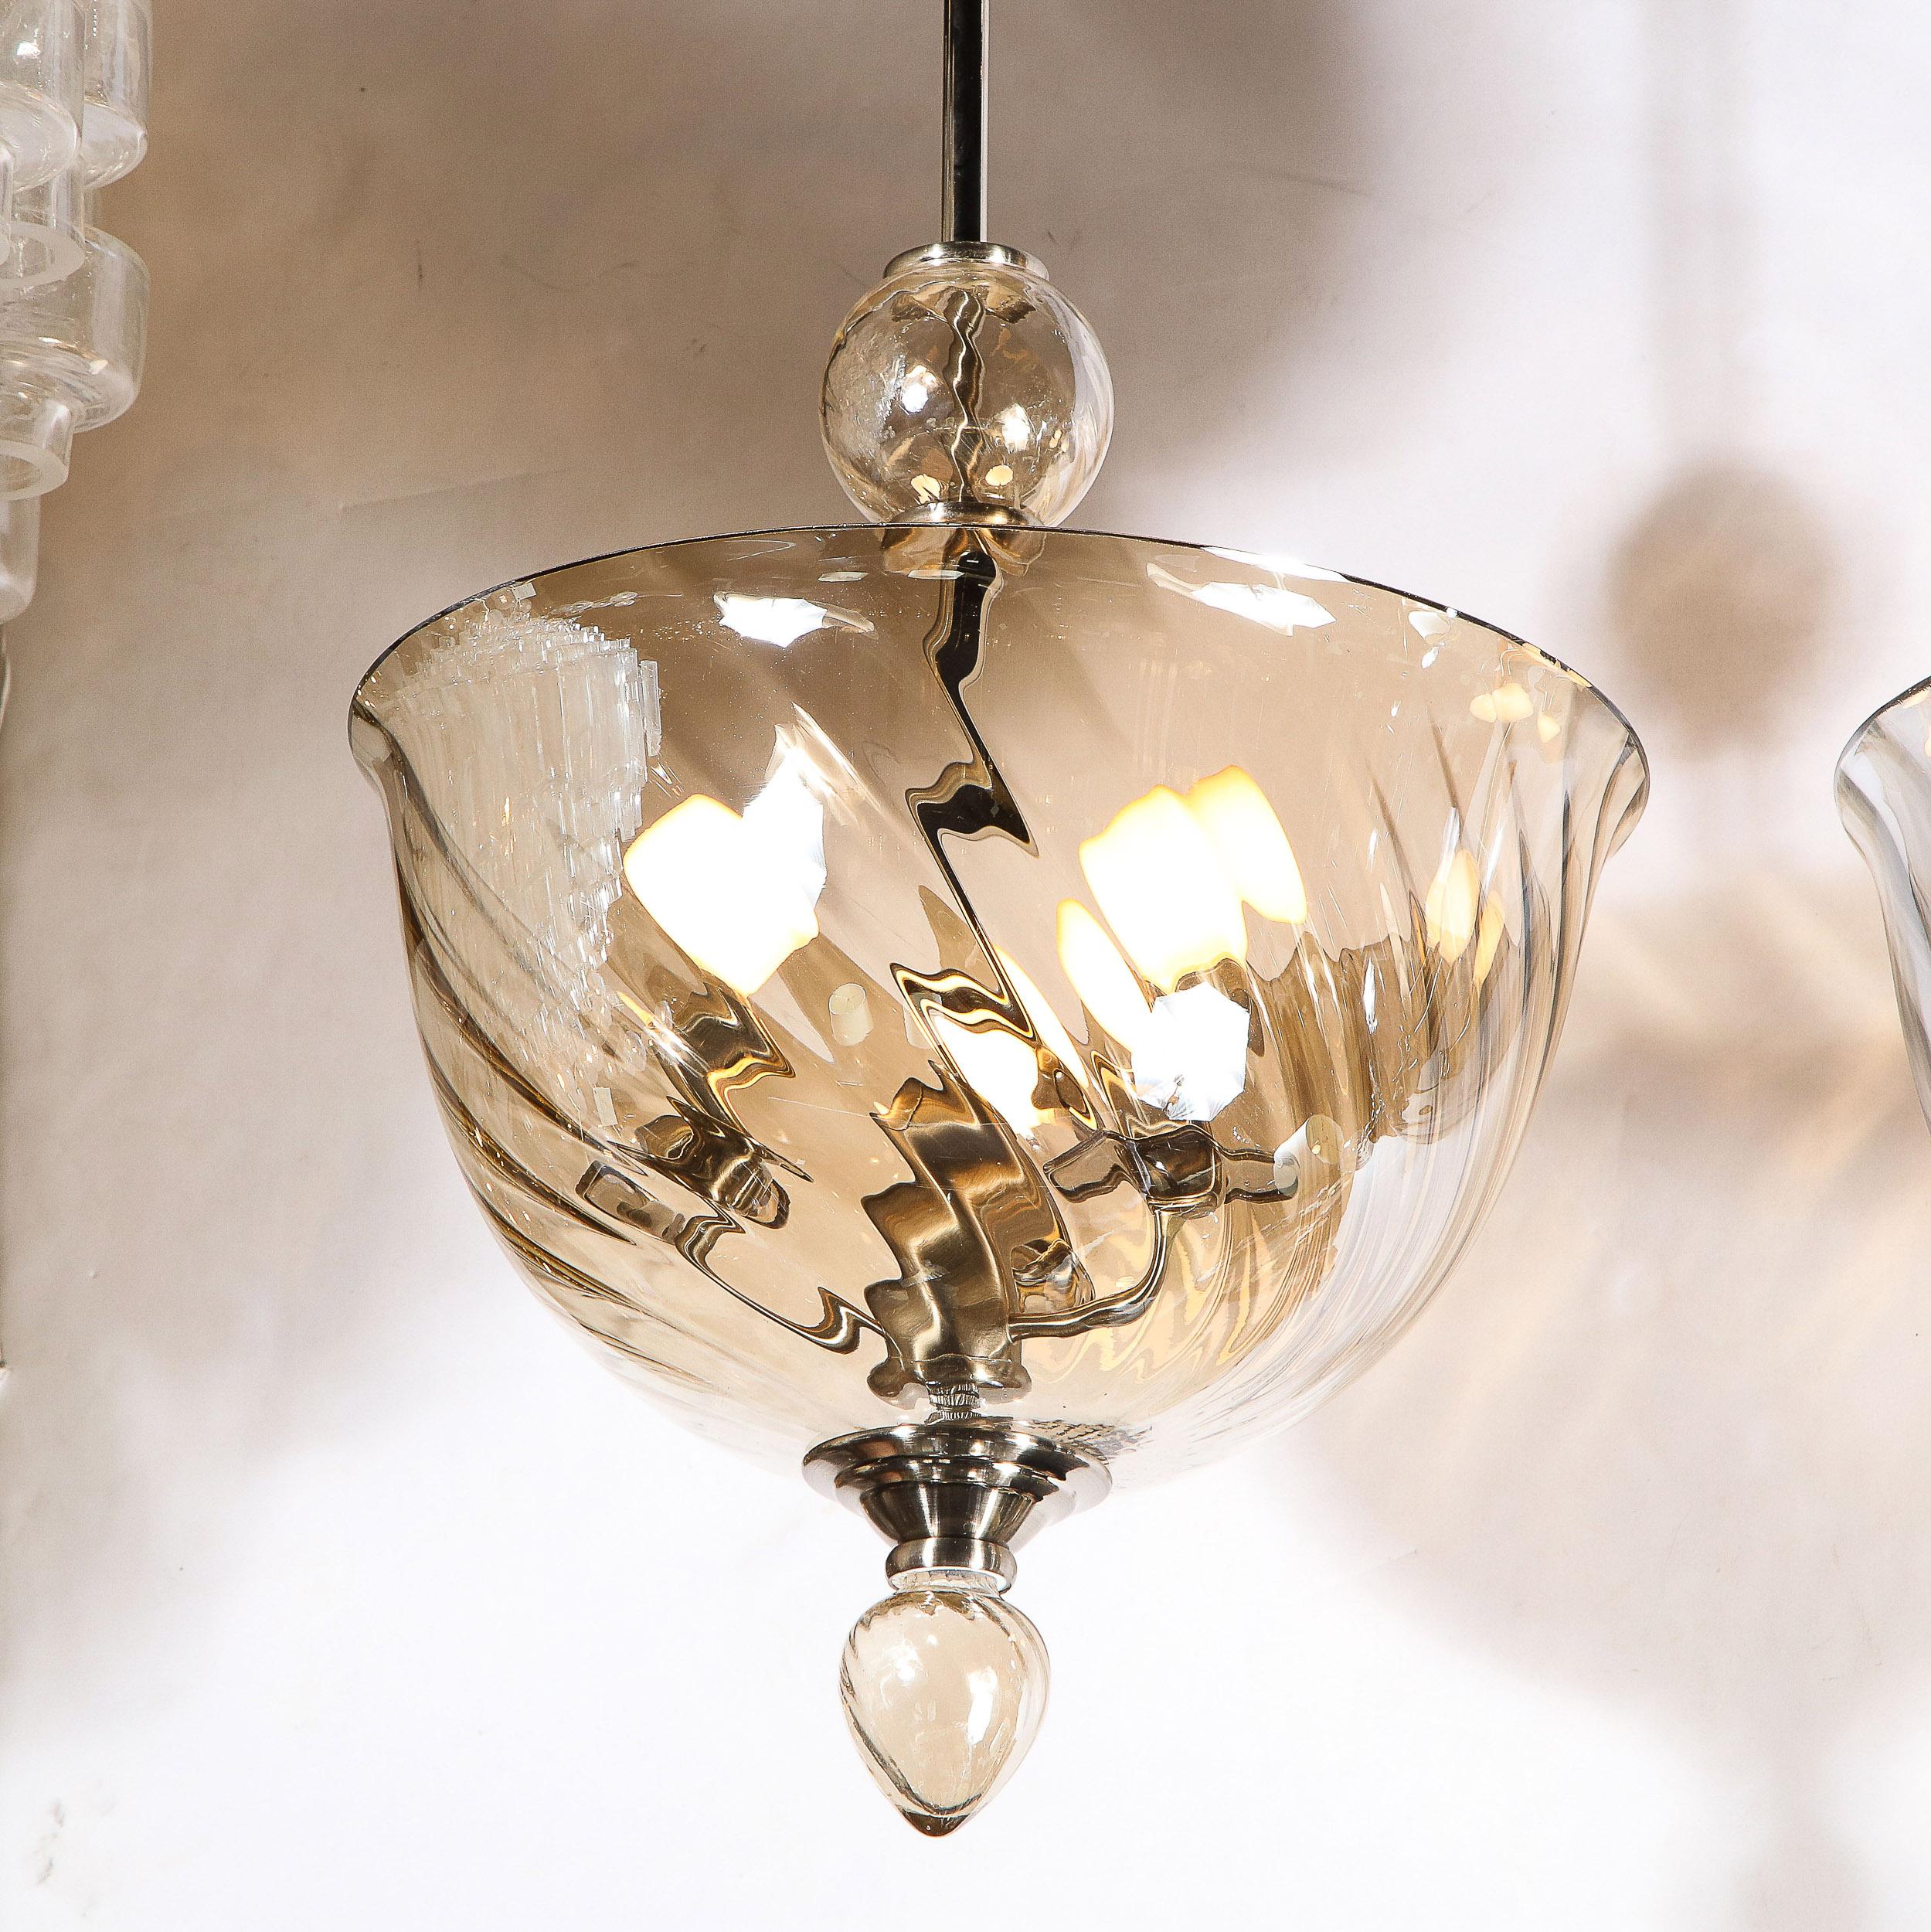 An Italian Mid-Century Modernist handblown Murano glass reverse-dome swirled detail glass chandelier. Nickel & Chrome fittings throughout, as well as a droplet glass finial detail complete the piece. The Chrome fitting can be adjusted to suit